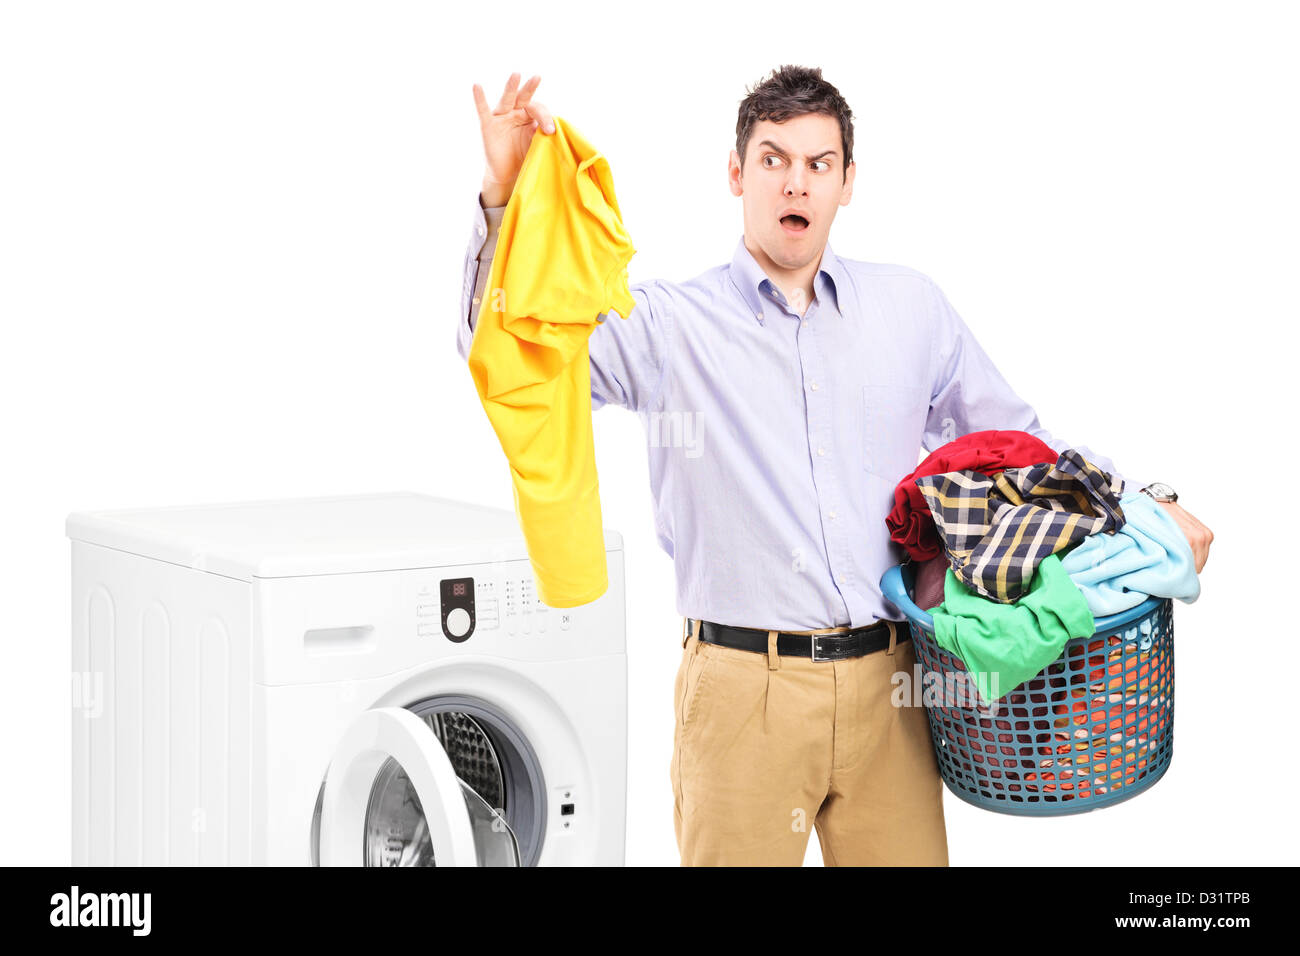 Young man standing next to a washing machine and holding dirty laundry isolated on white background Stock Photo